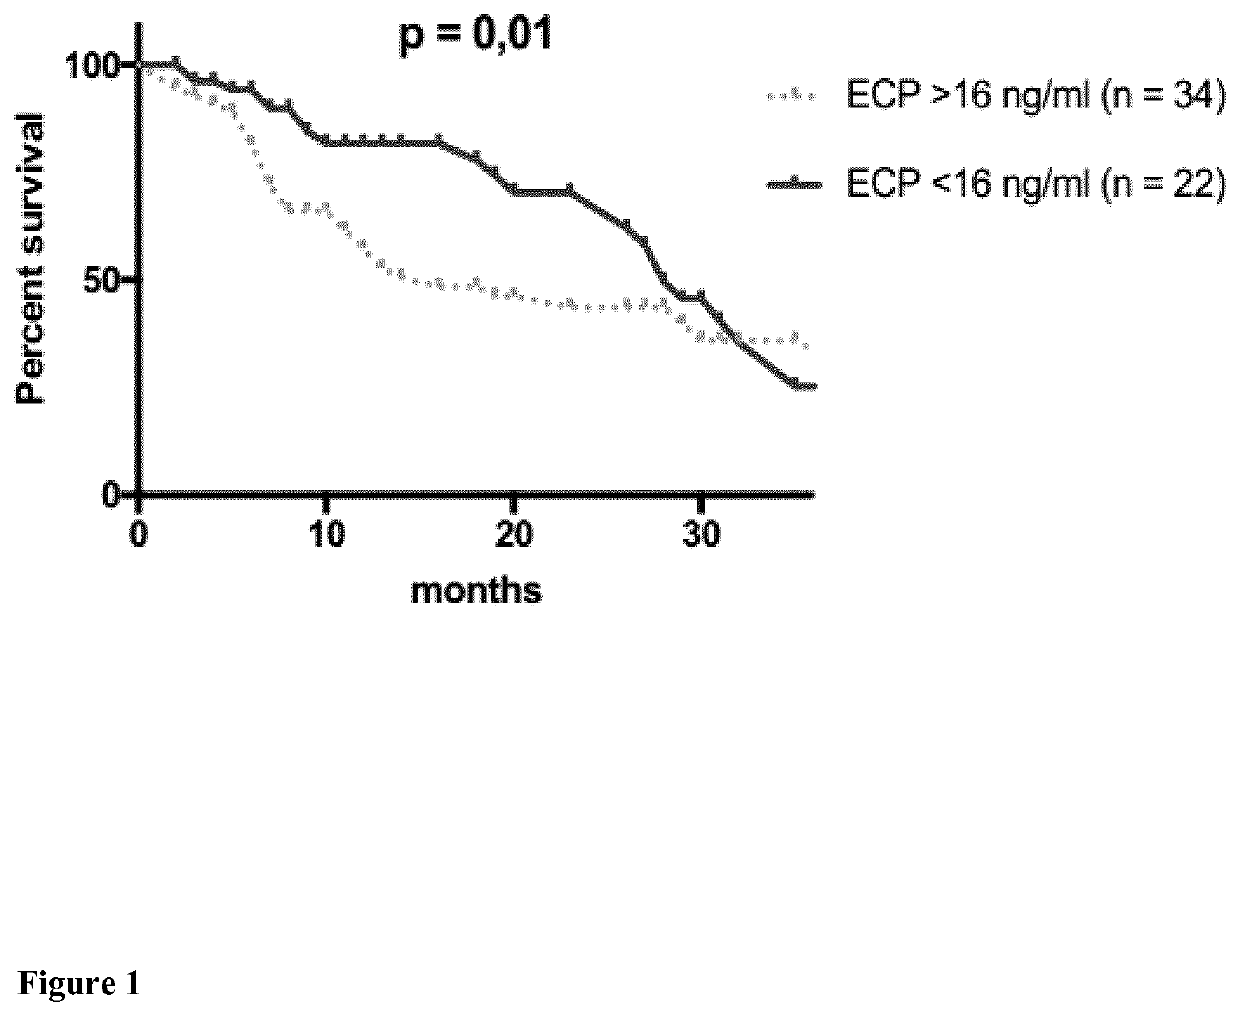 Eosinophil Cationic Protein (ECP) as a Tumor Marker for Malignant Tumors